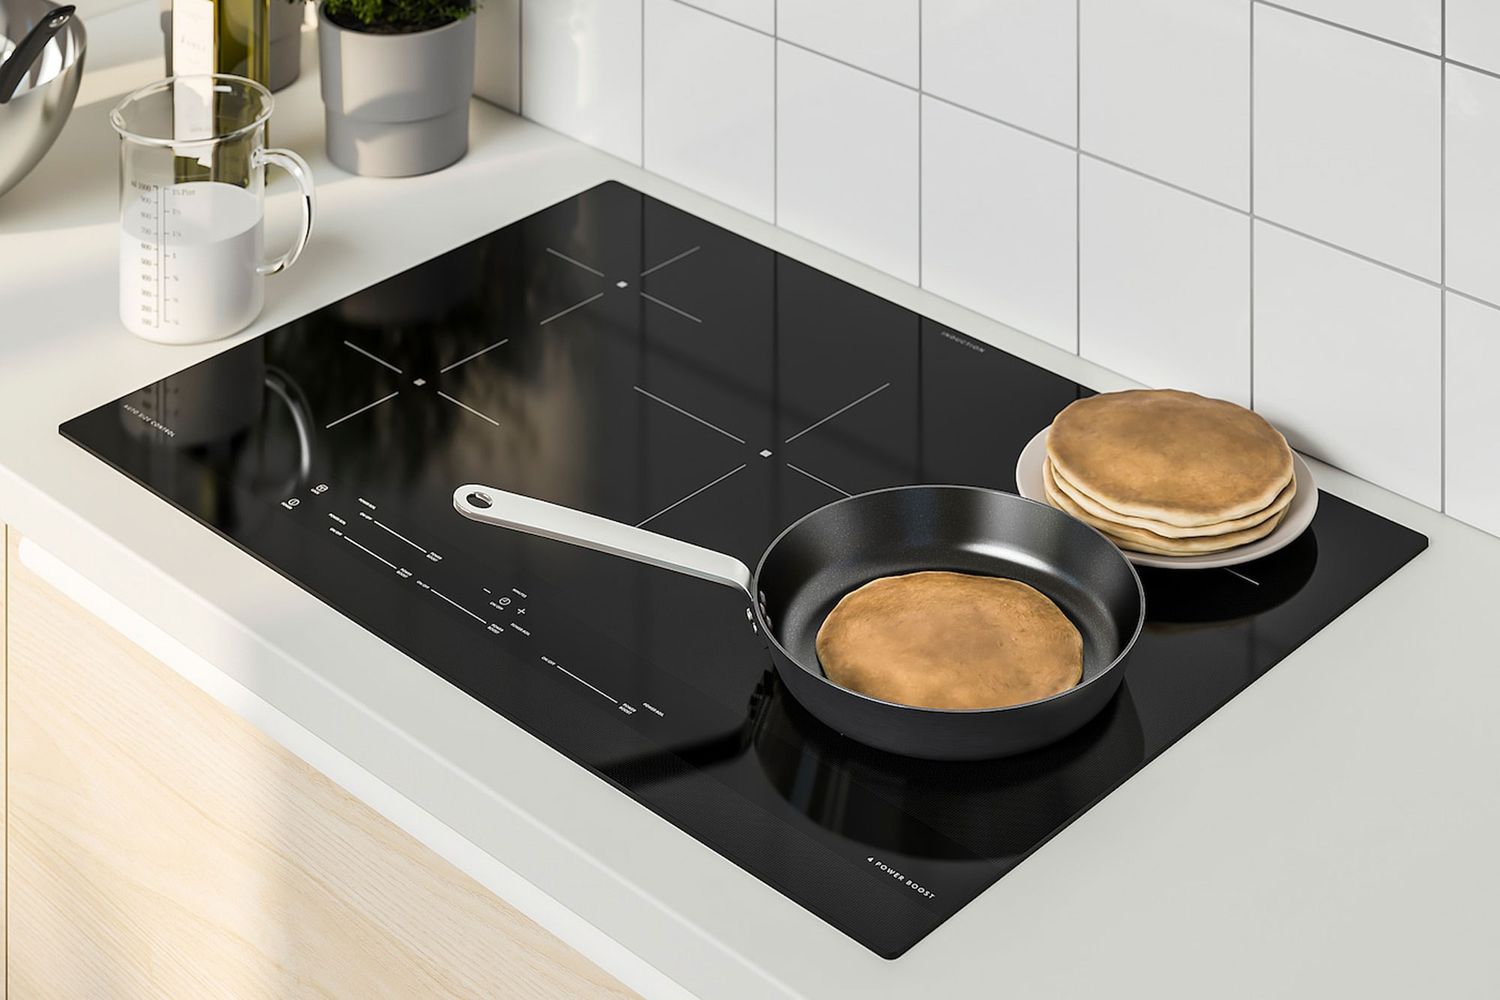 Magnetic induction cooking can cut your kitchen's carbon footprint